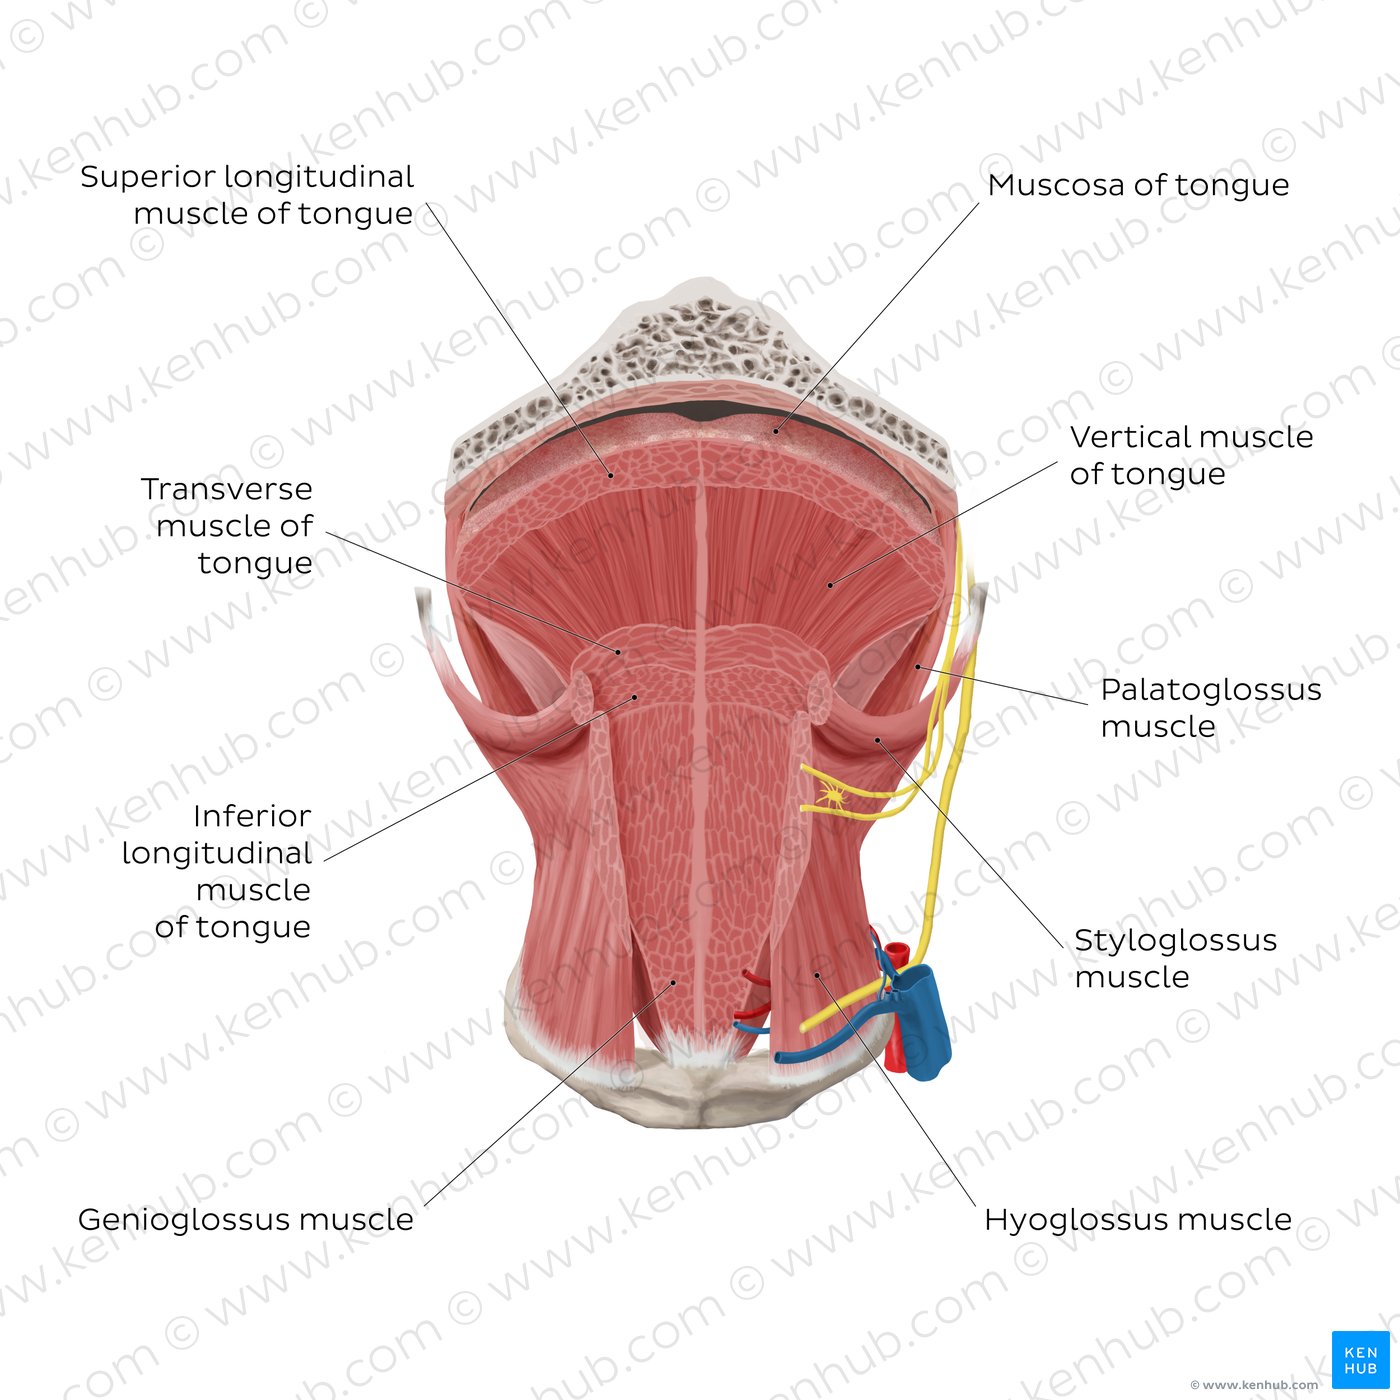 Tongue muscles (overview): coronal section